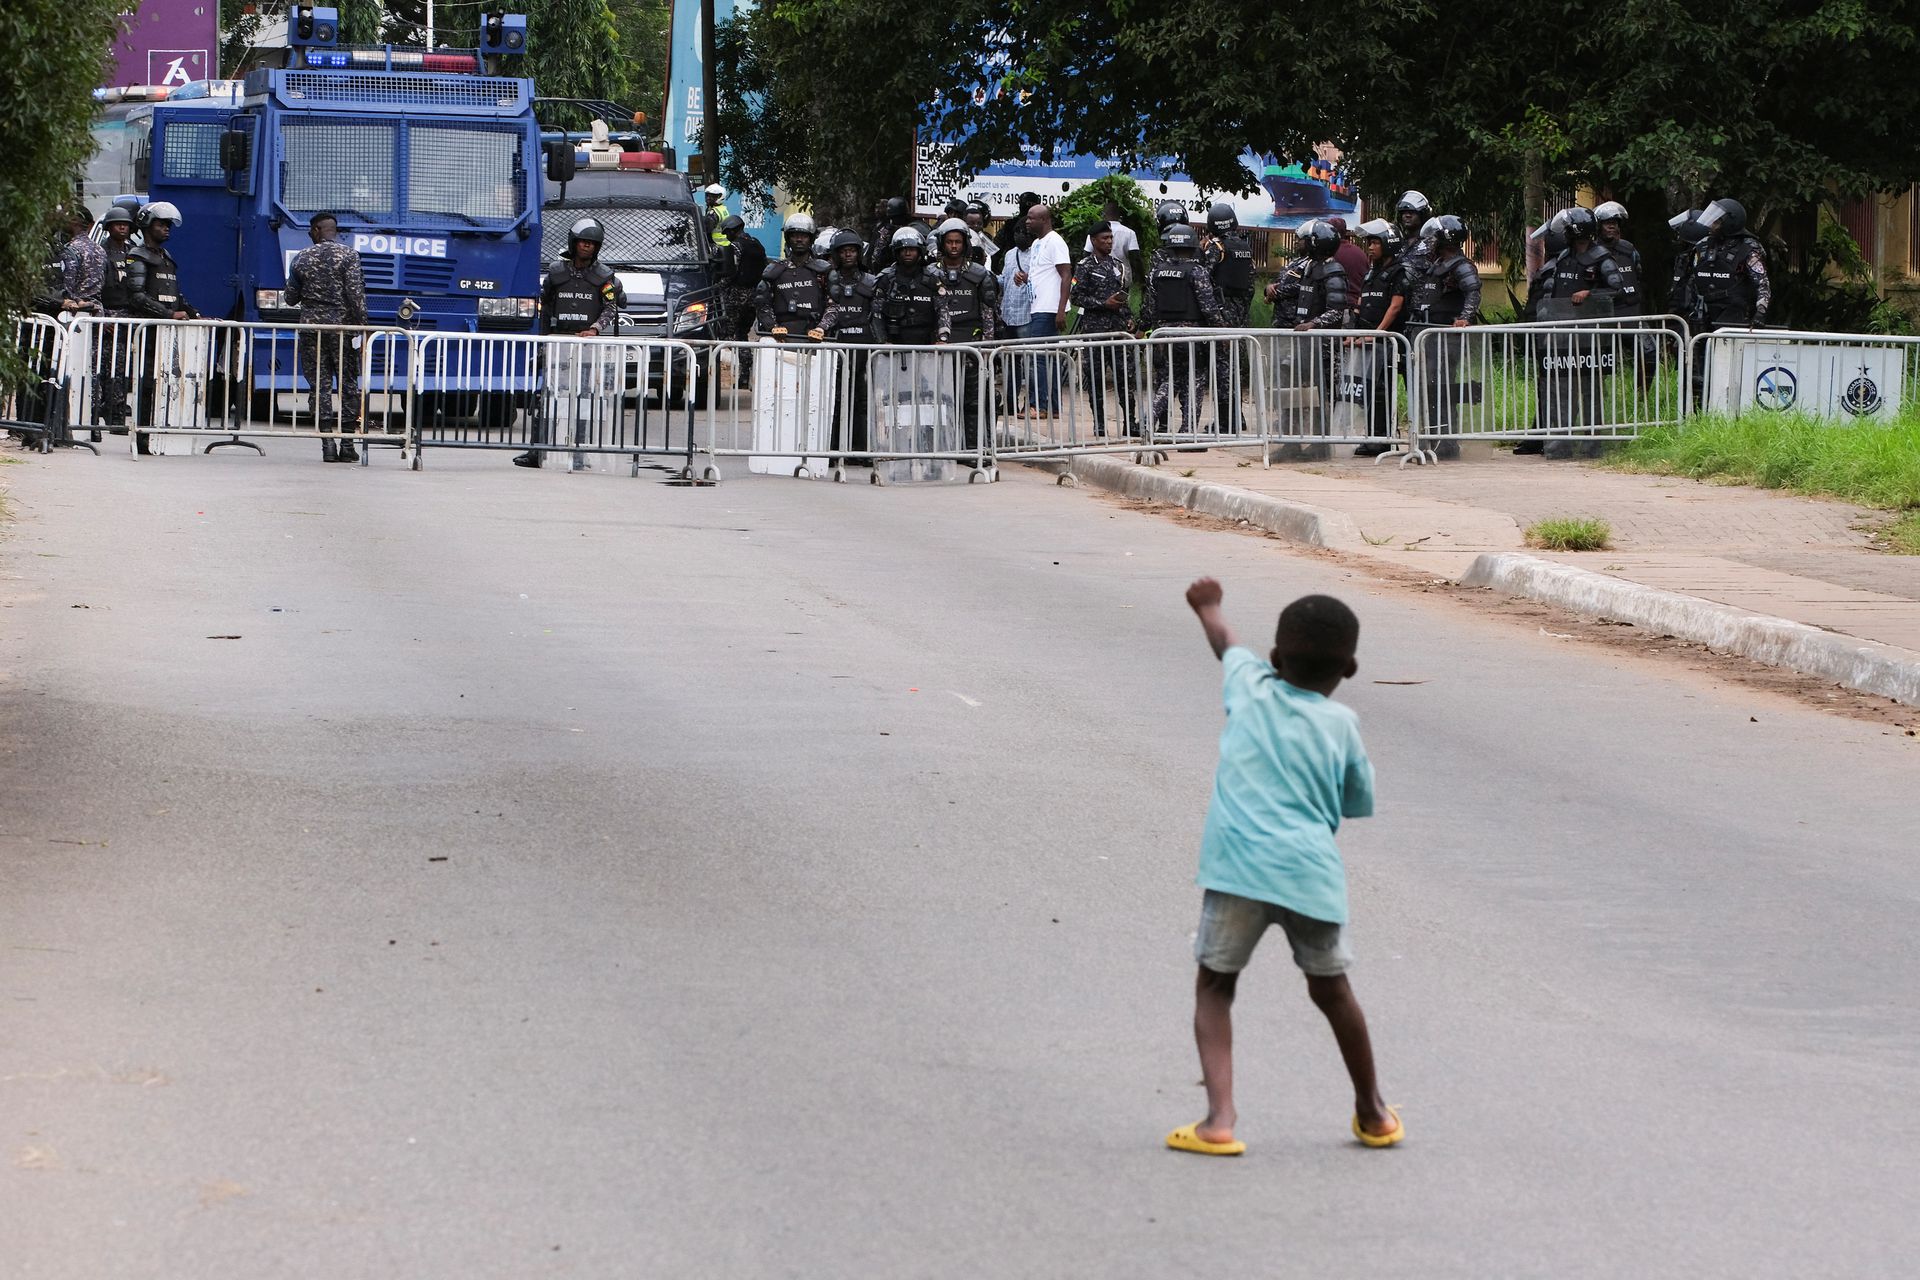 A young boy gestures at the police as demonstrators gather in the streets for a third day of anti-government protests in Accra, Ghana, September 23, 2023. REUTERS/Francis Kokoroko